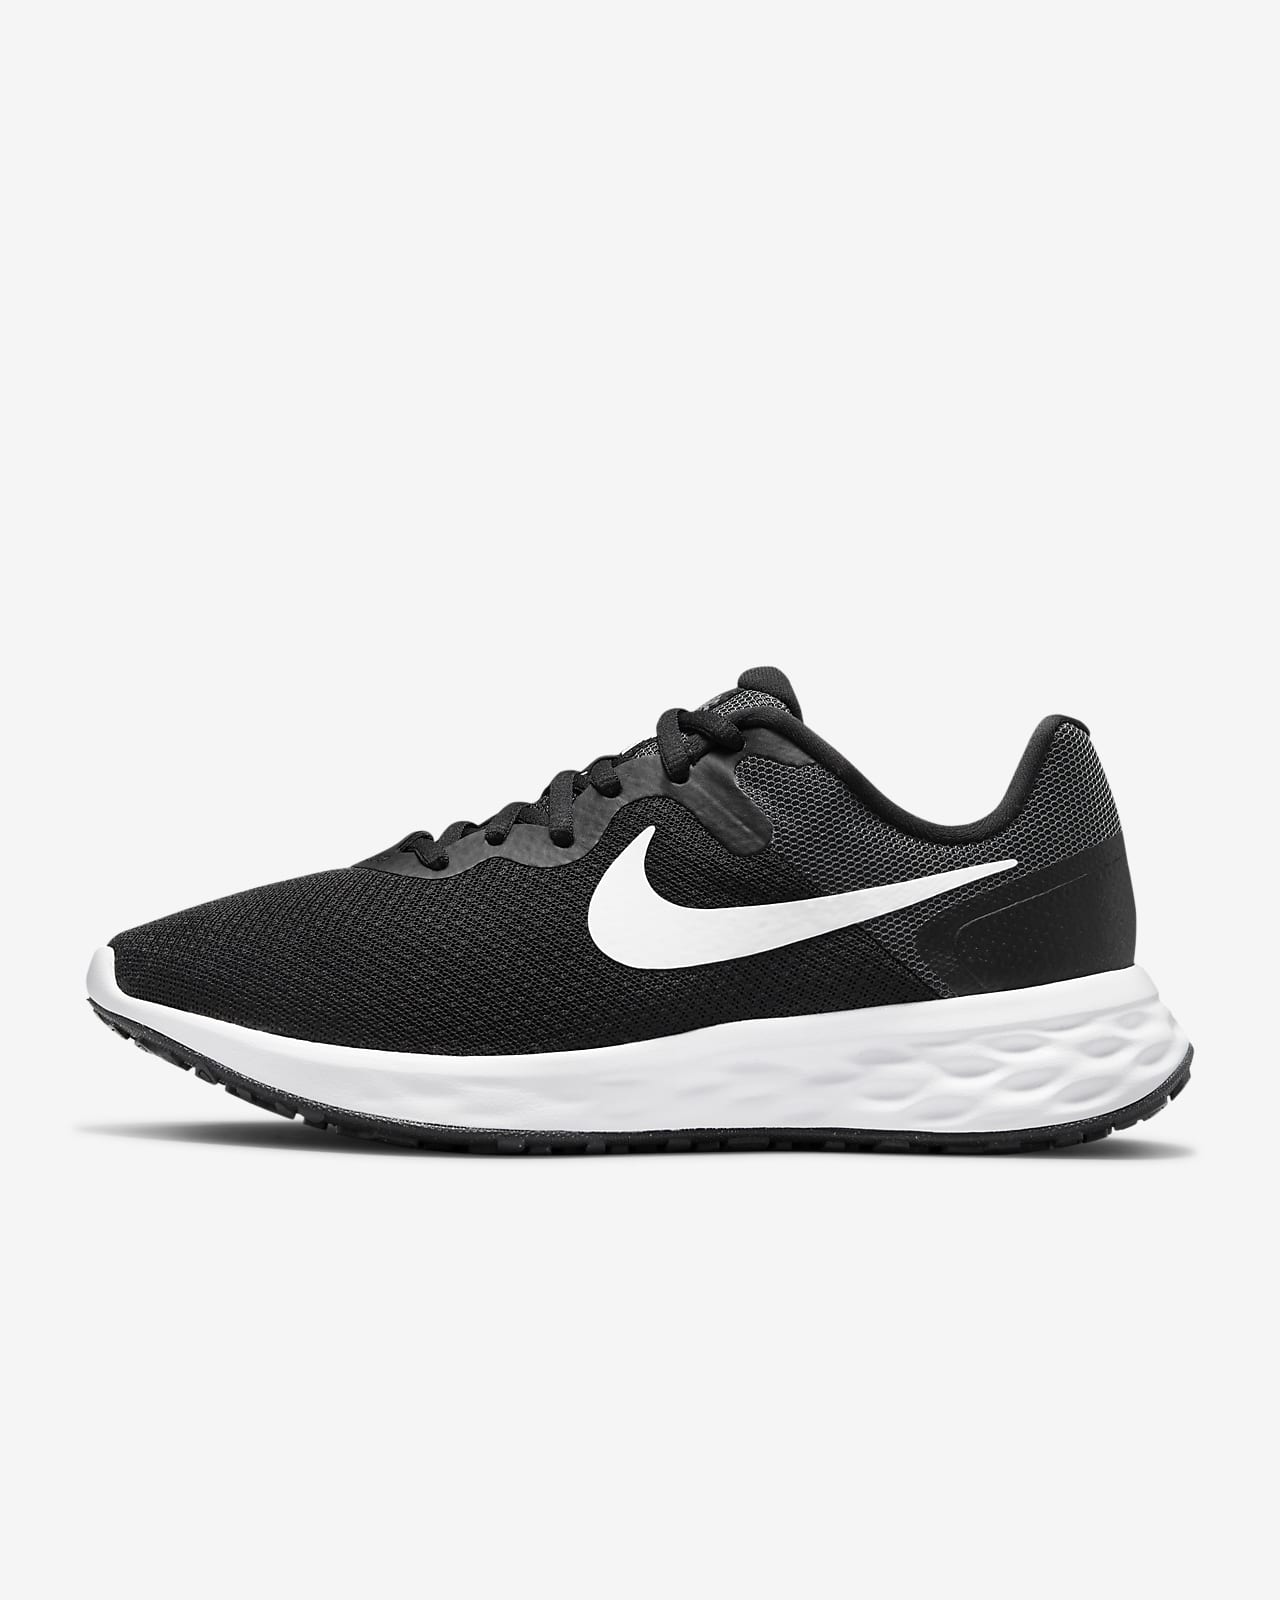 Check Out the Best Black Sneaker Styles by Nike.